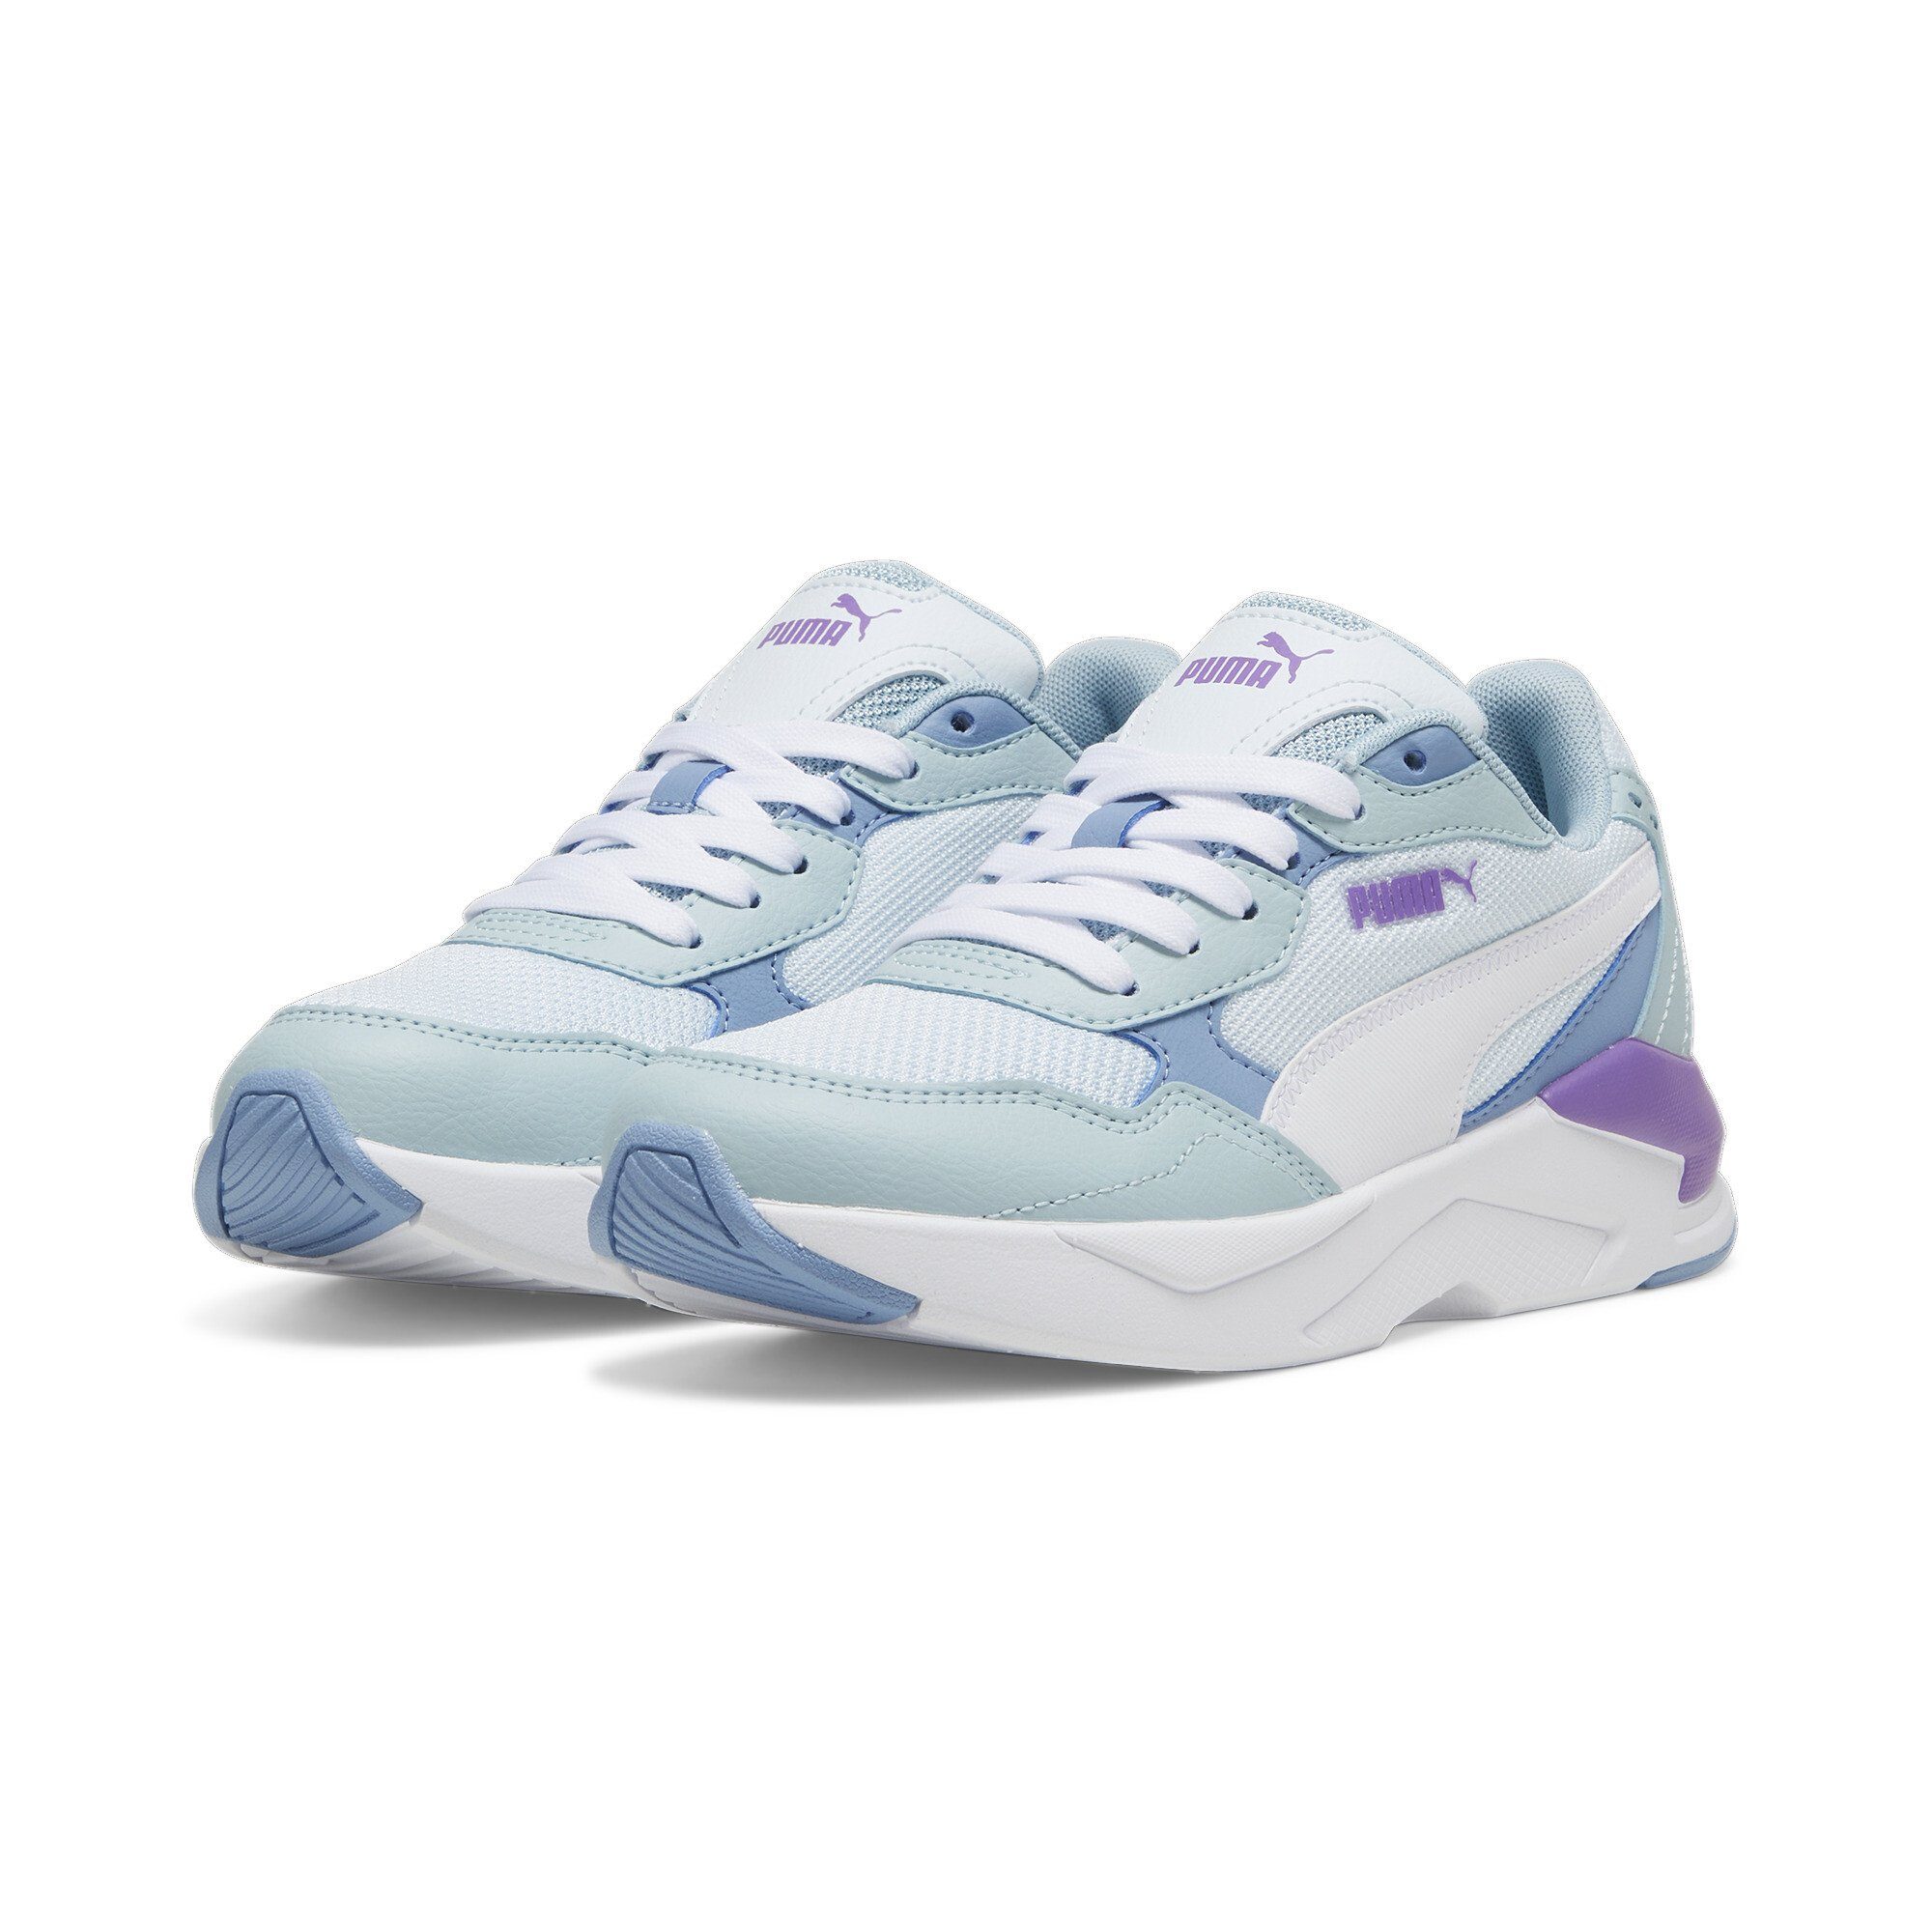 PUMA X-Ray Speed Lite Sneakers Jugendliche Sneaker Dewdrop White Turquoise Surf Blue | Fitnessschuhe